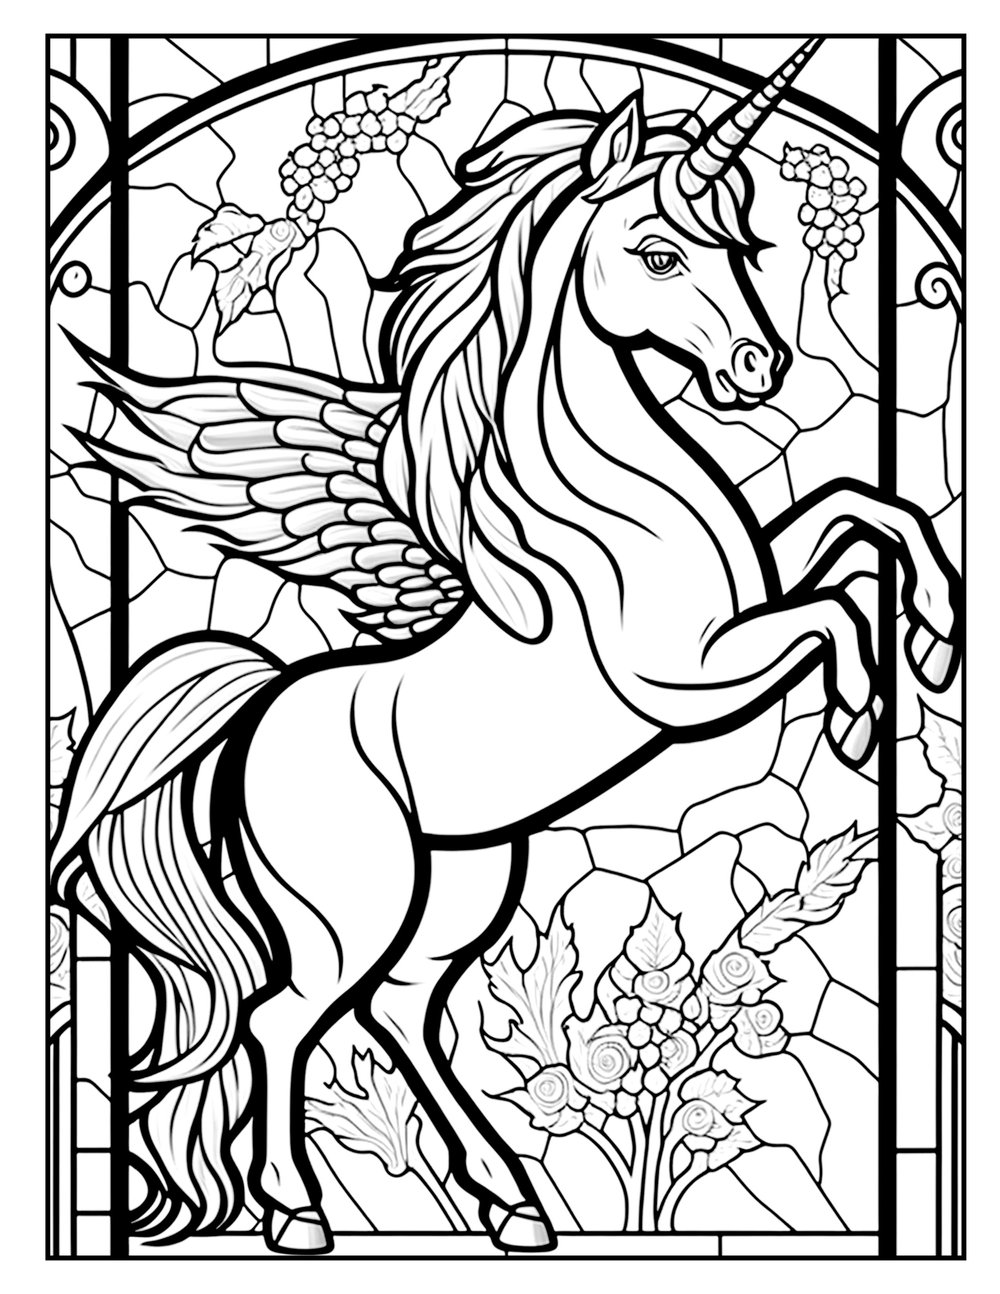 Stained glass style coloring pages images â chris nelson